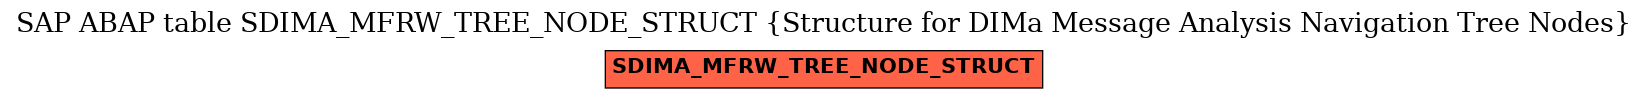 E-R Diagram for table SDIMA_MFRW_TREE_NODE_STRUCT (Structure for DIMa Message Analysis Navigation Tree Nodes)